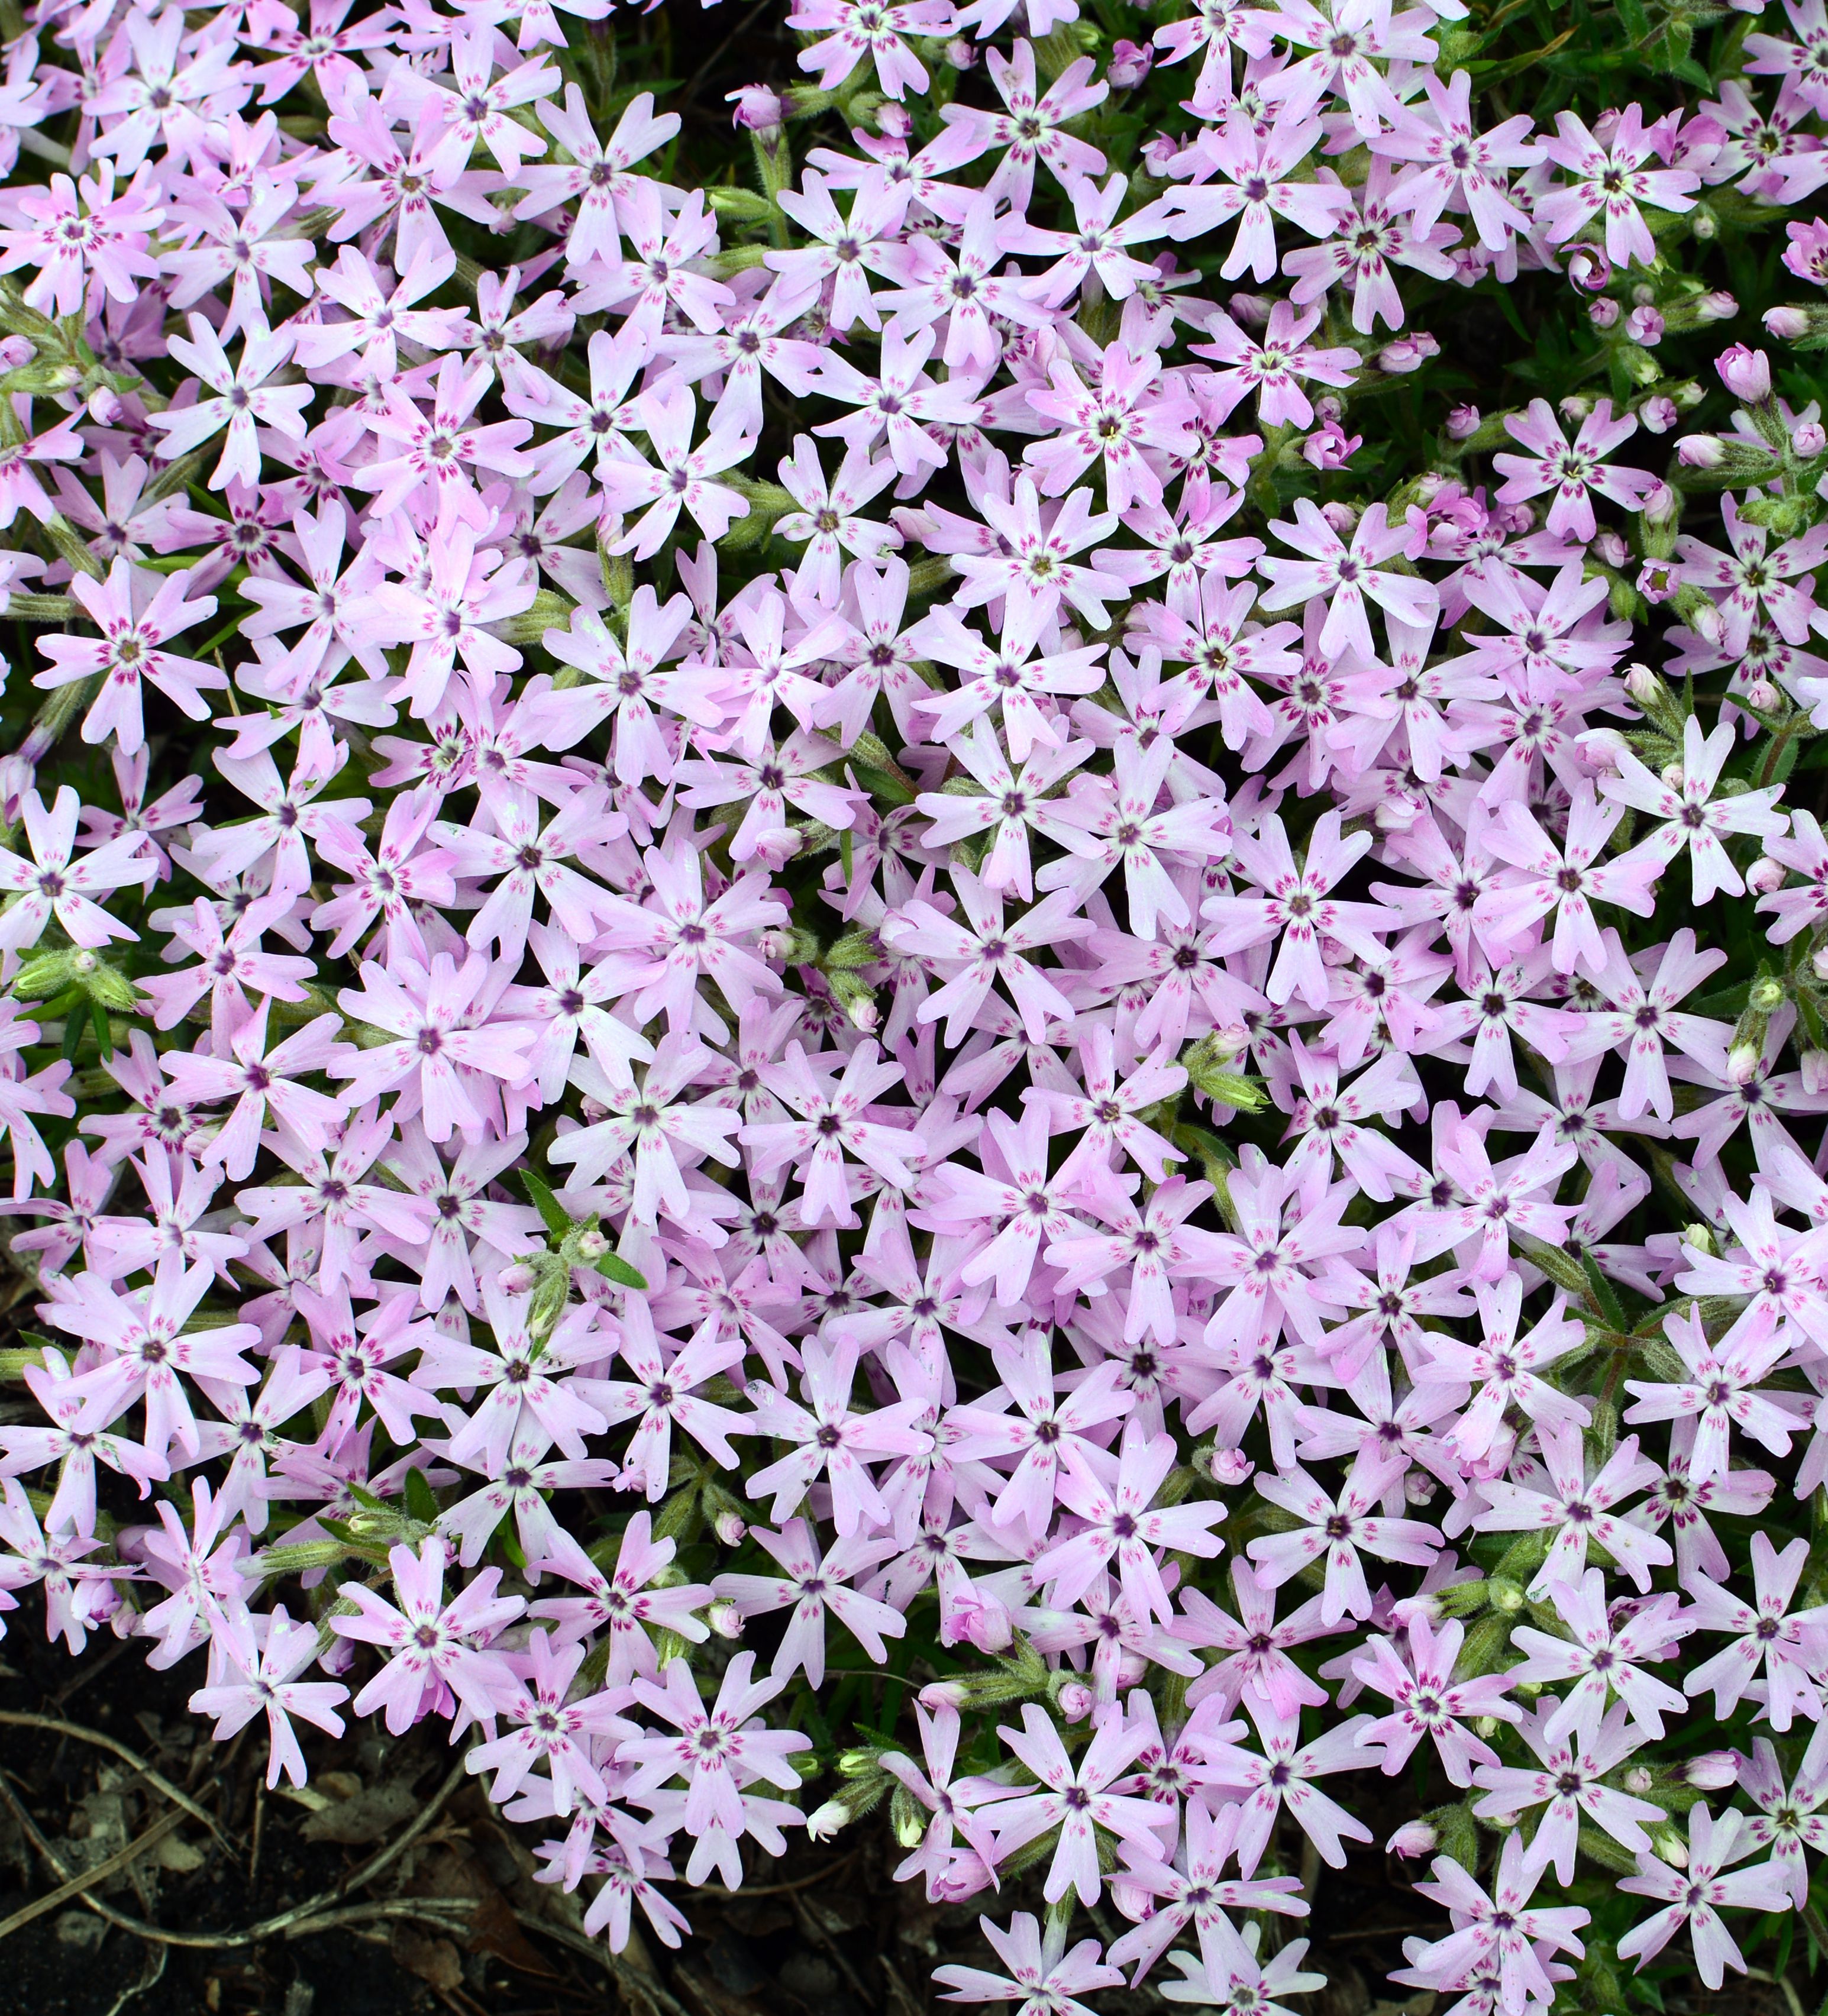 images/plants/phlox/phl-perfectly-puzzling/phl-perfectly-puzzling-0004.jpg